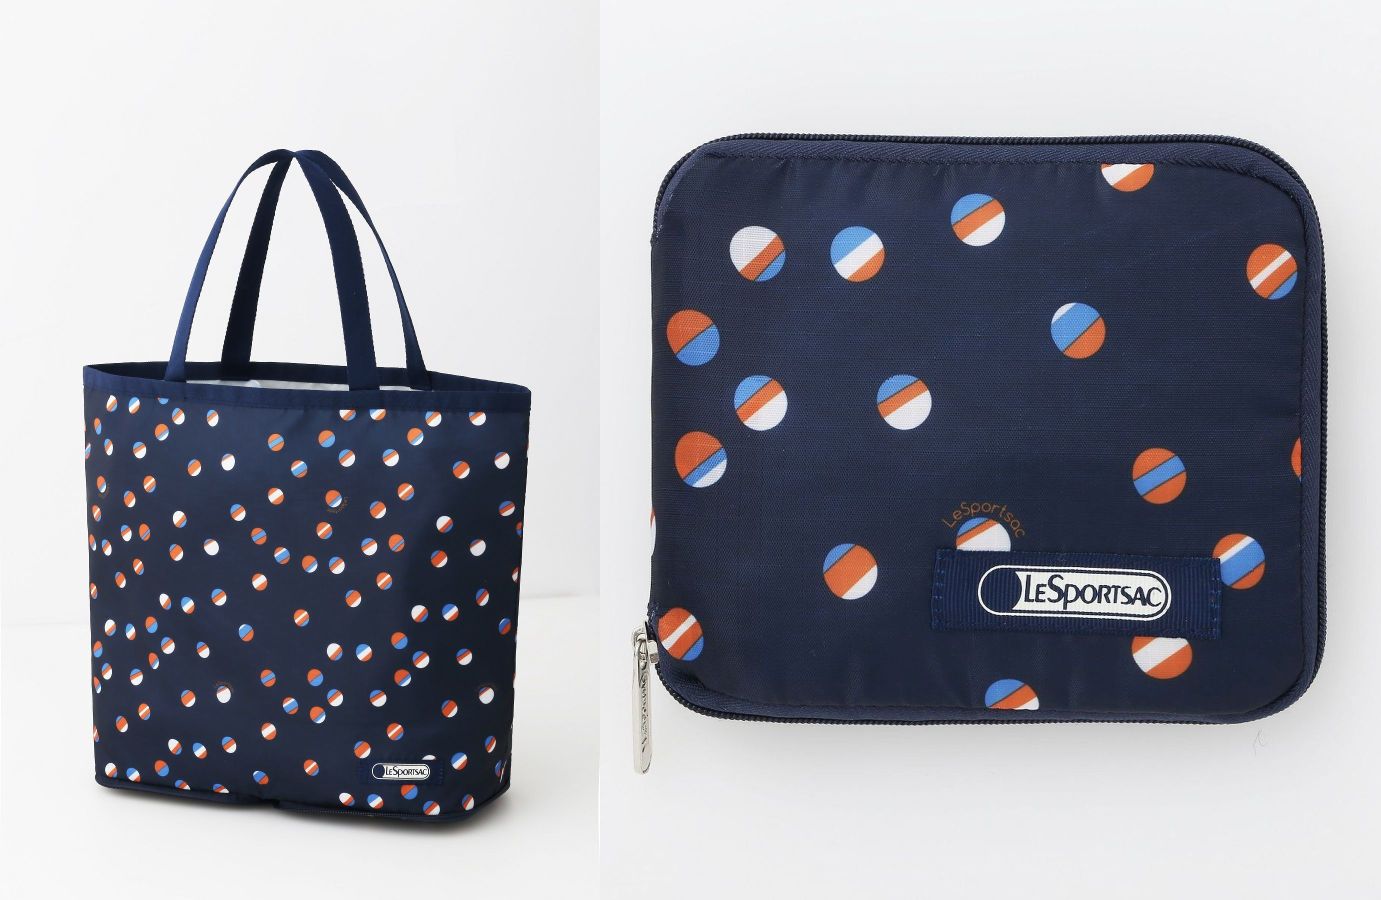 Lesportsac Collection Book Style2 16 本 楽天ブックス